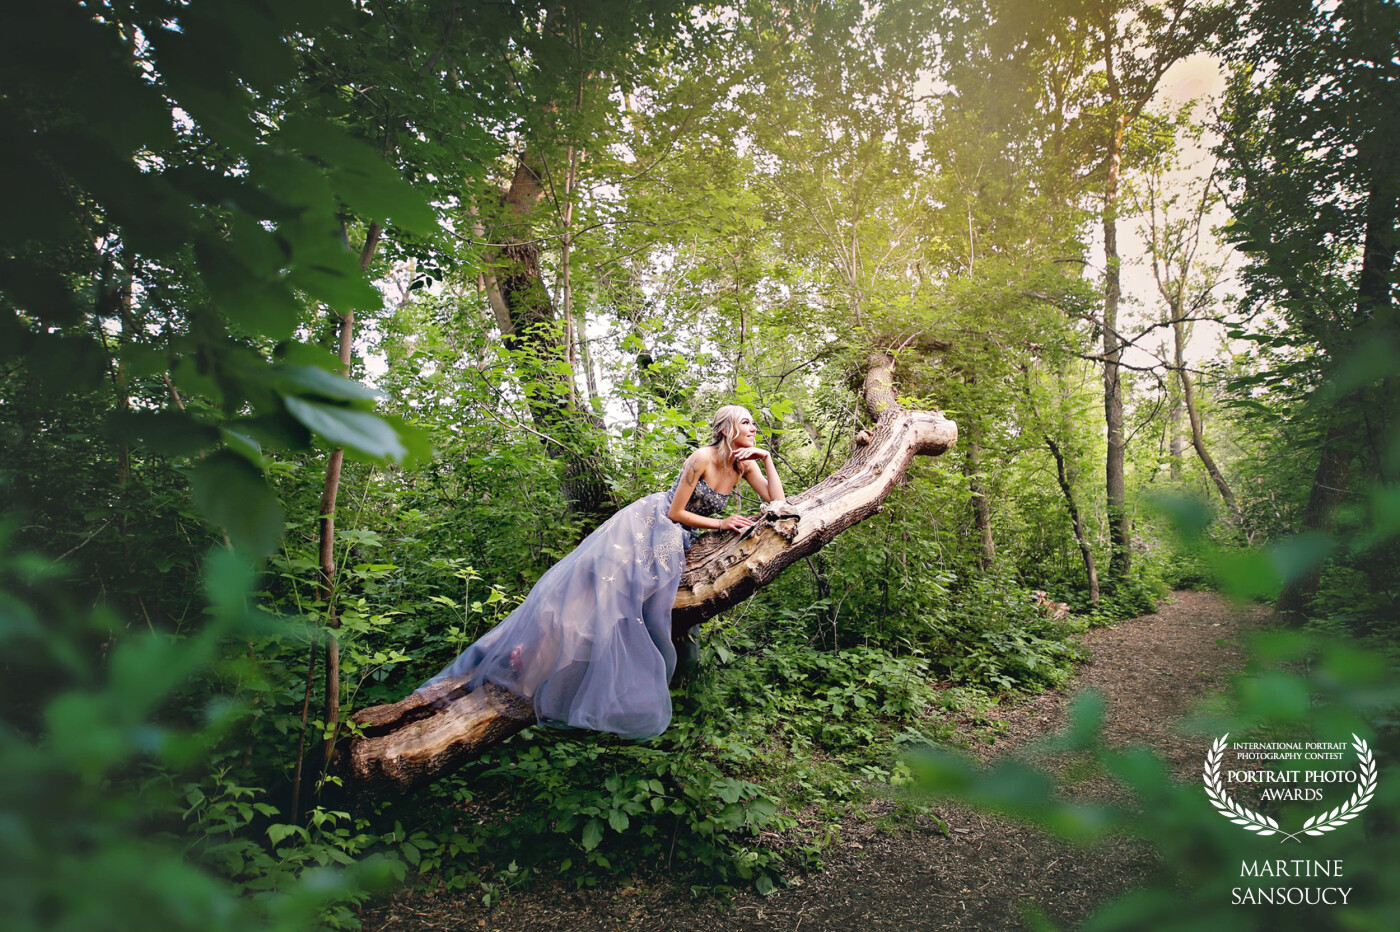 This was such a fairytale grad session and finding this tree during the session was amazing! It made for such an ethereal image of this beautiful graduate!